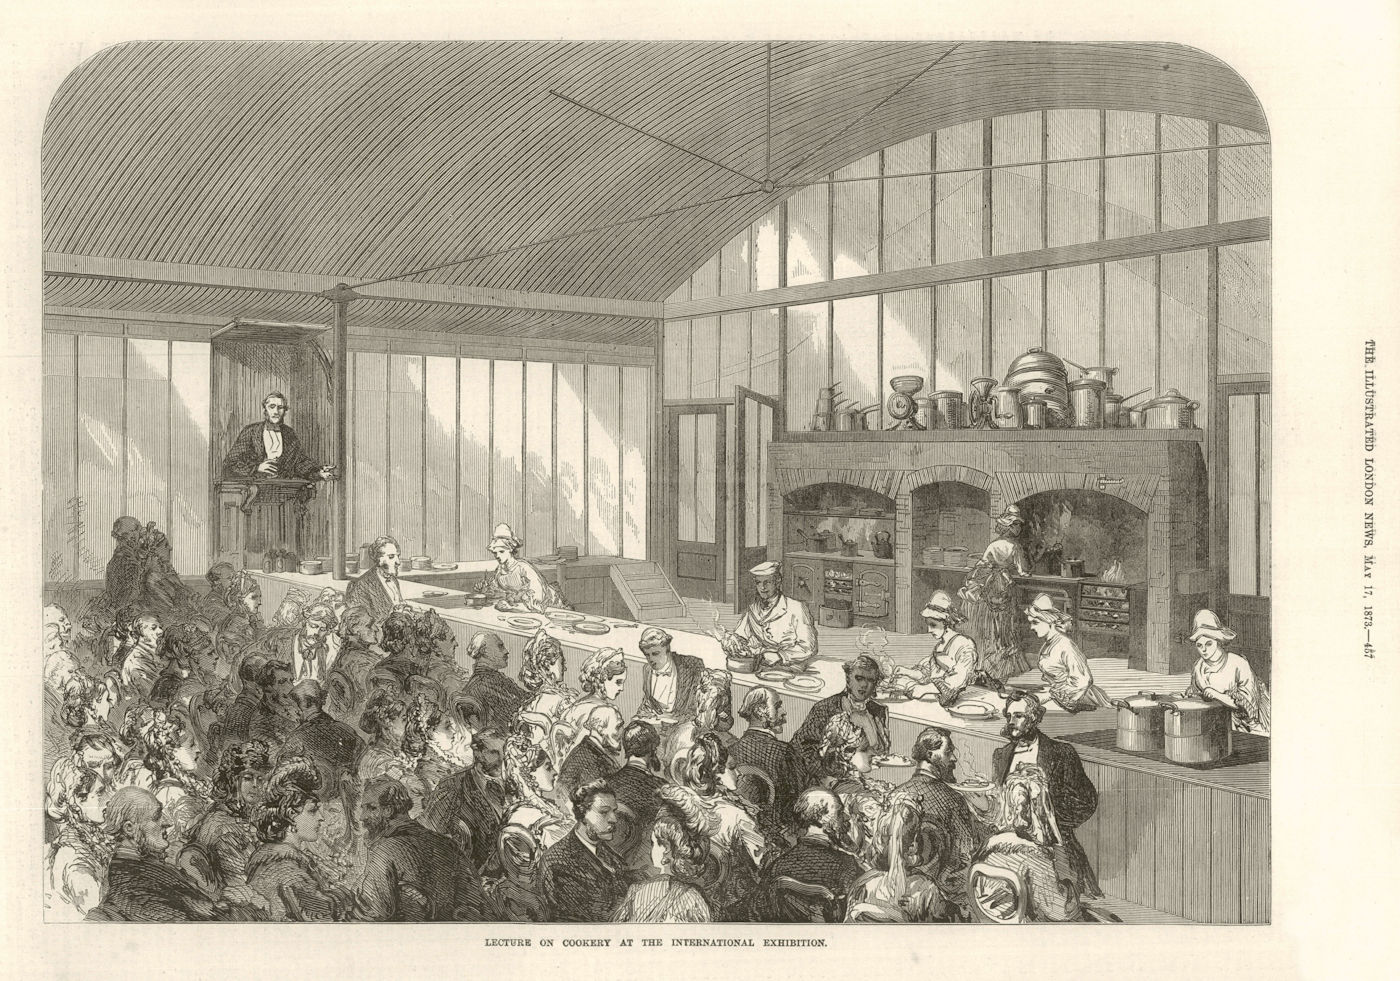 Associate Product Lecture on cookery at the International Exhibition. Hospitality. London 1873